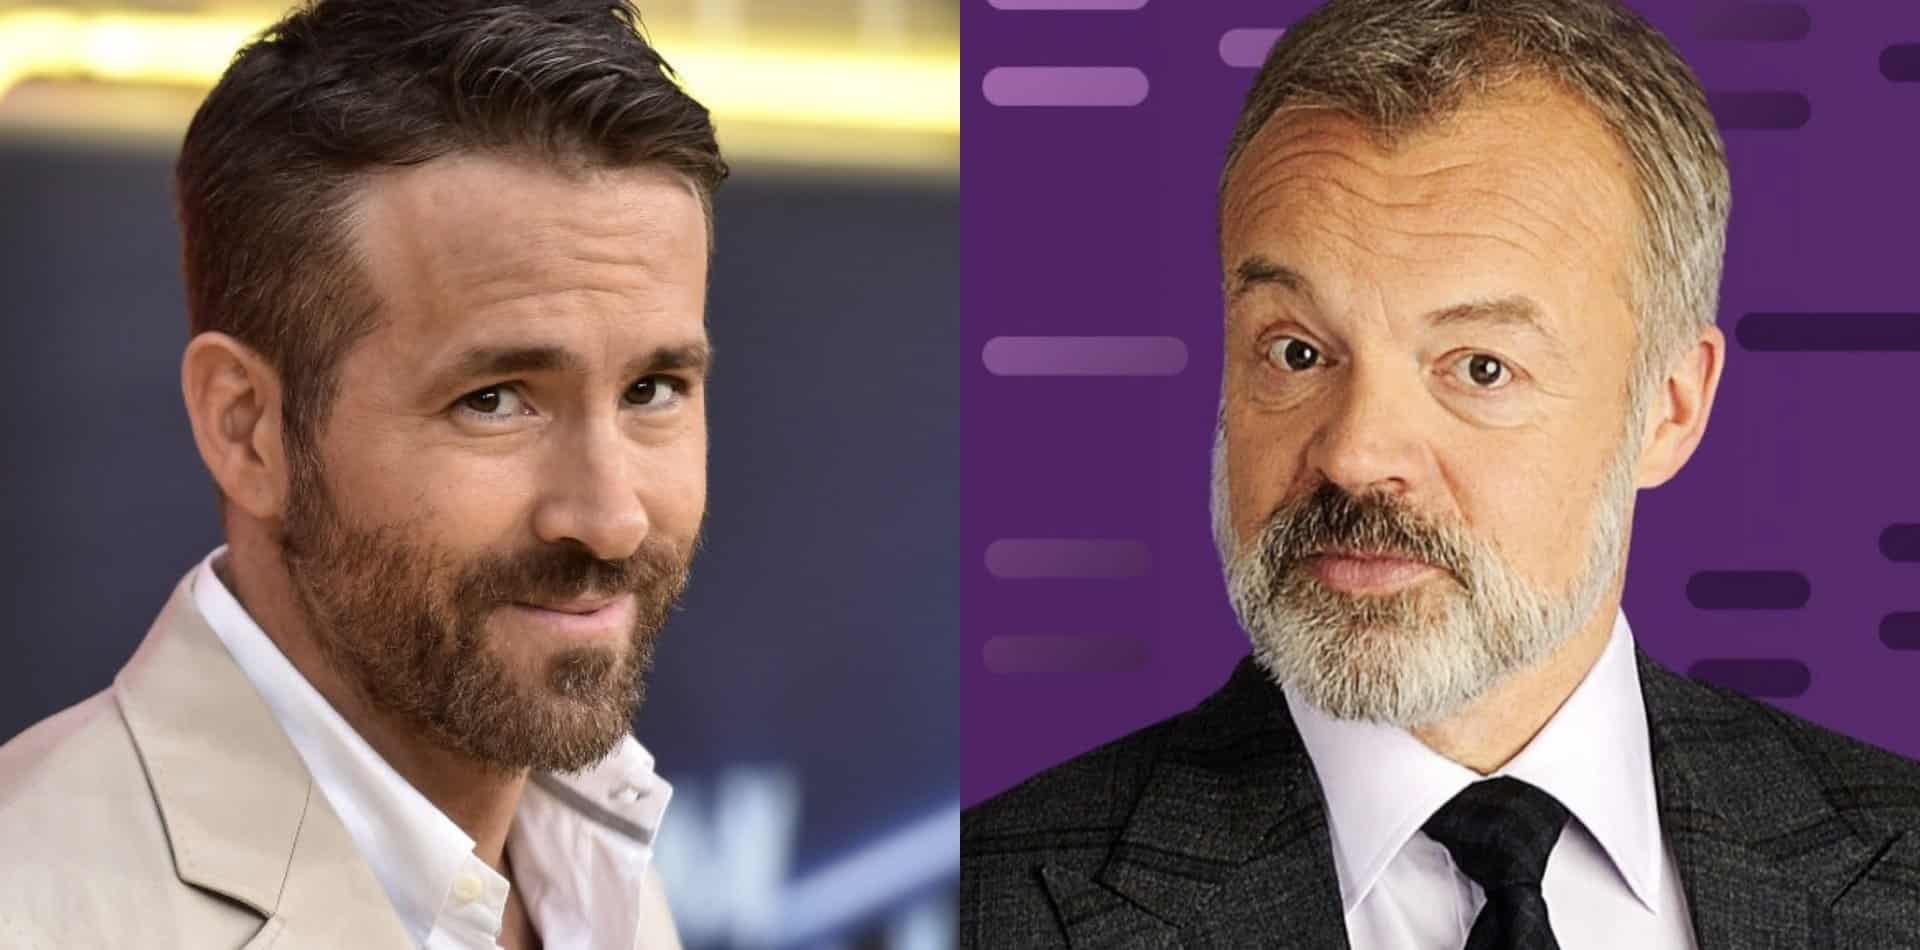 Just for Laughs festival expands to London, Ryan Reynolds and Graham Norton to headline